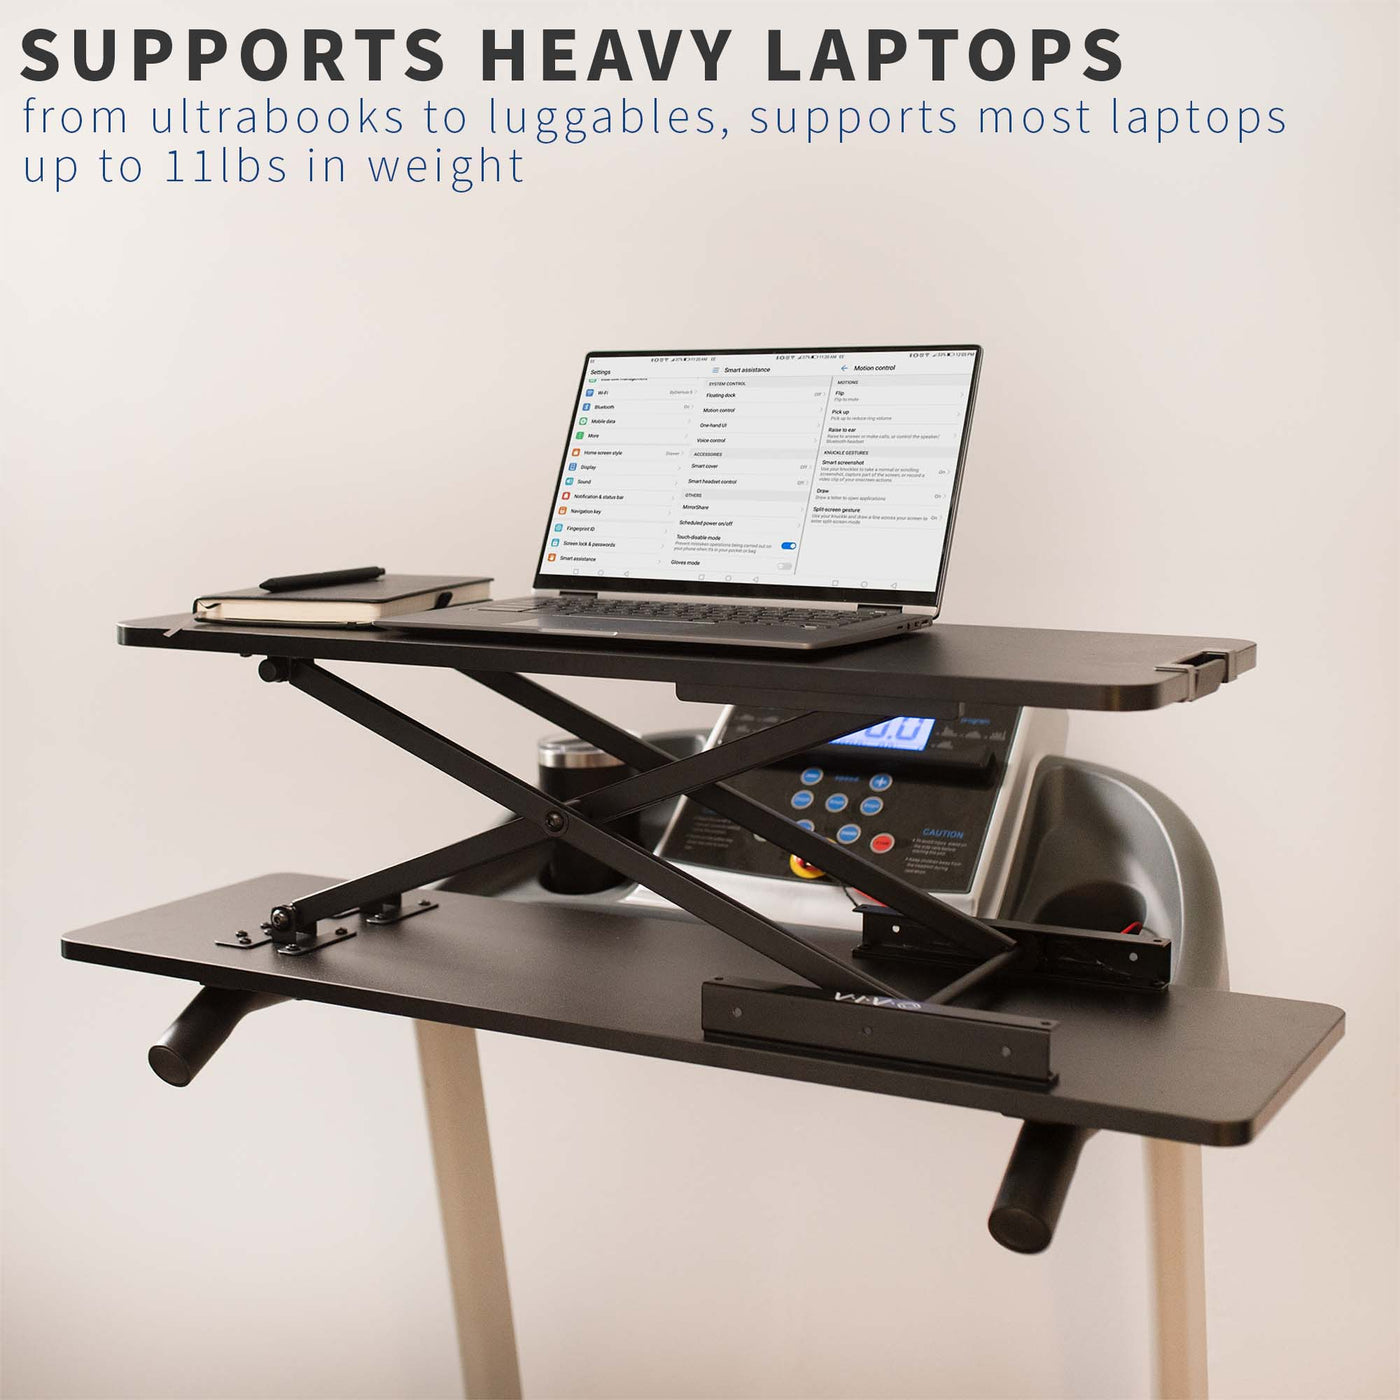 Heavy duty laptop treadmill tray providing maximum support for your laptop or other device.